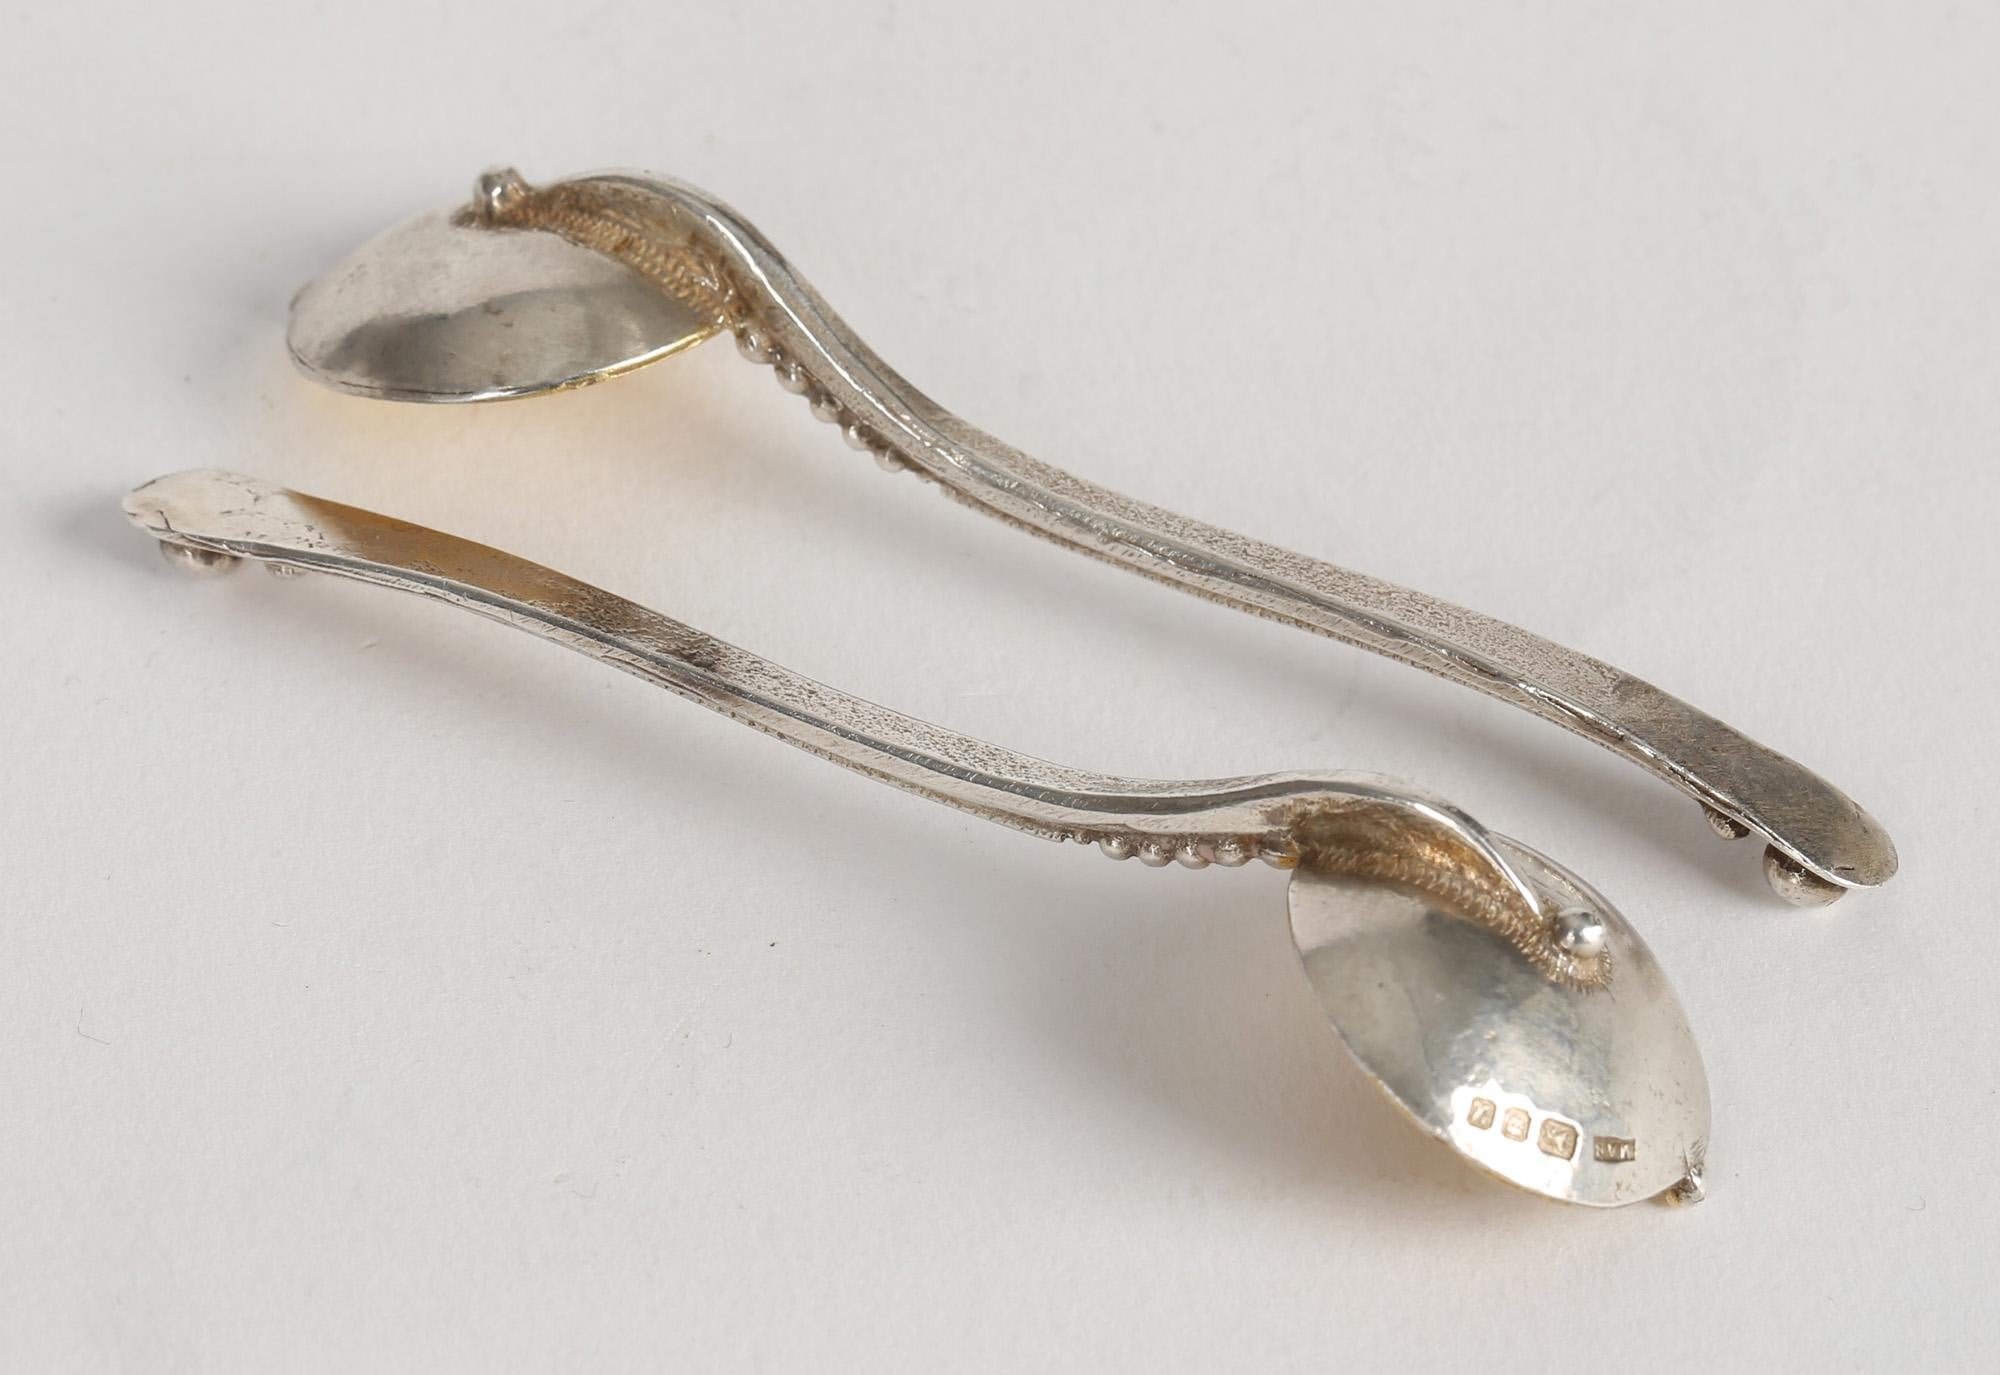 A stunning pair Arts & Crafts inspired gilded silver salt spoons by London silversmith Michael Allen Bolton dated 1994. Michael was an informally trained professional silversmith whose designs were inspired by ancient and medieval styles and the